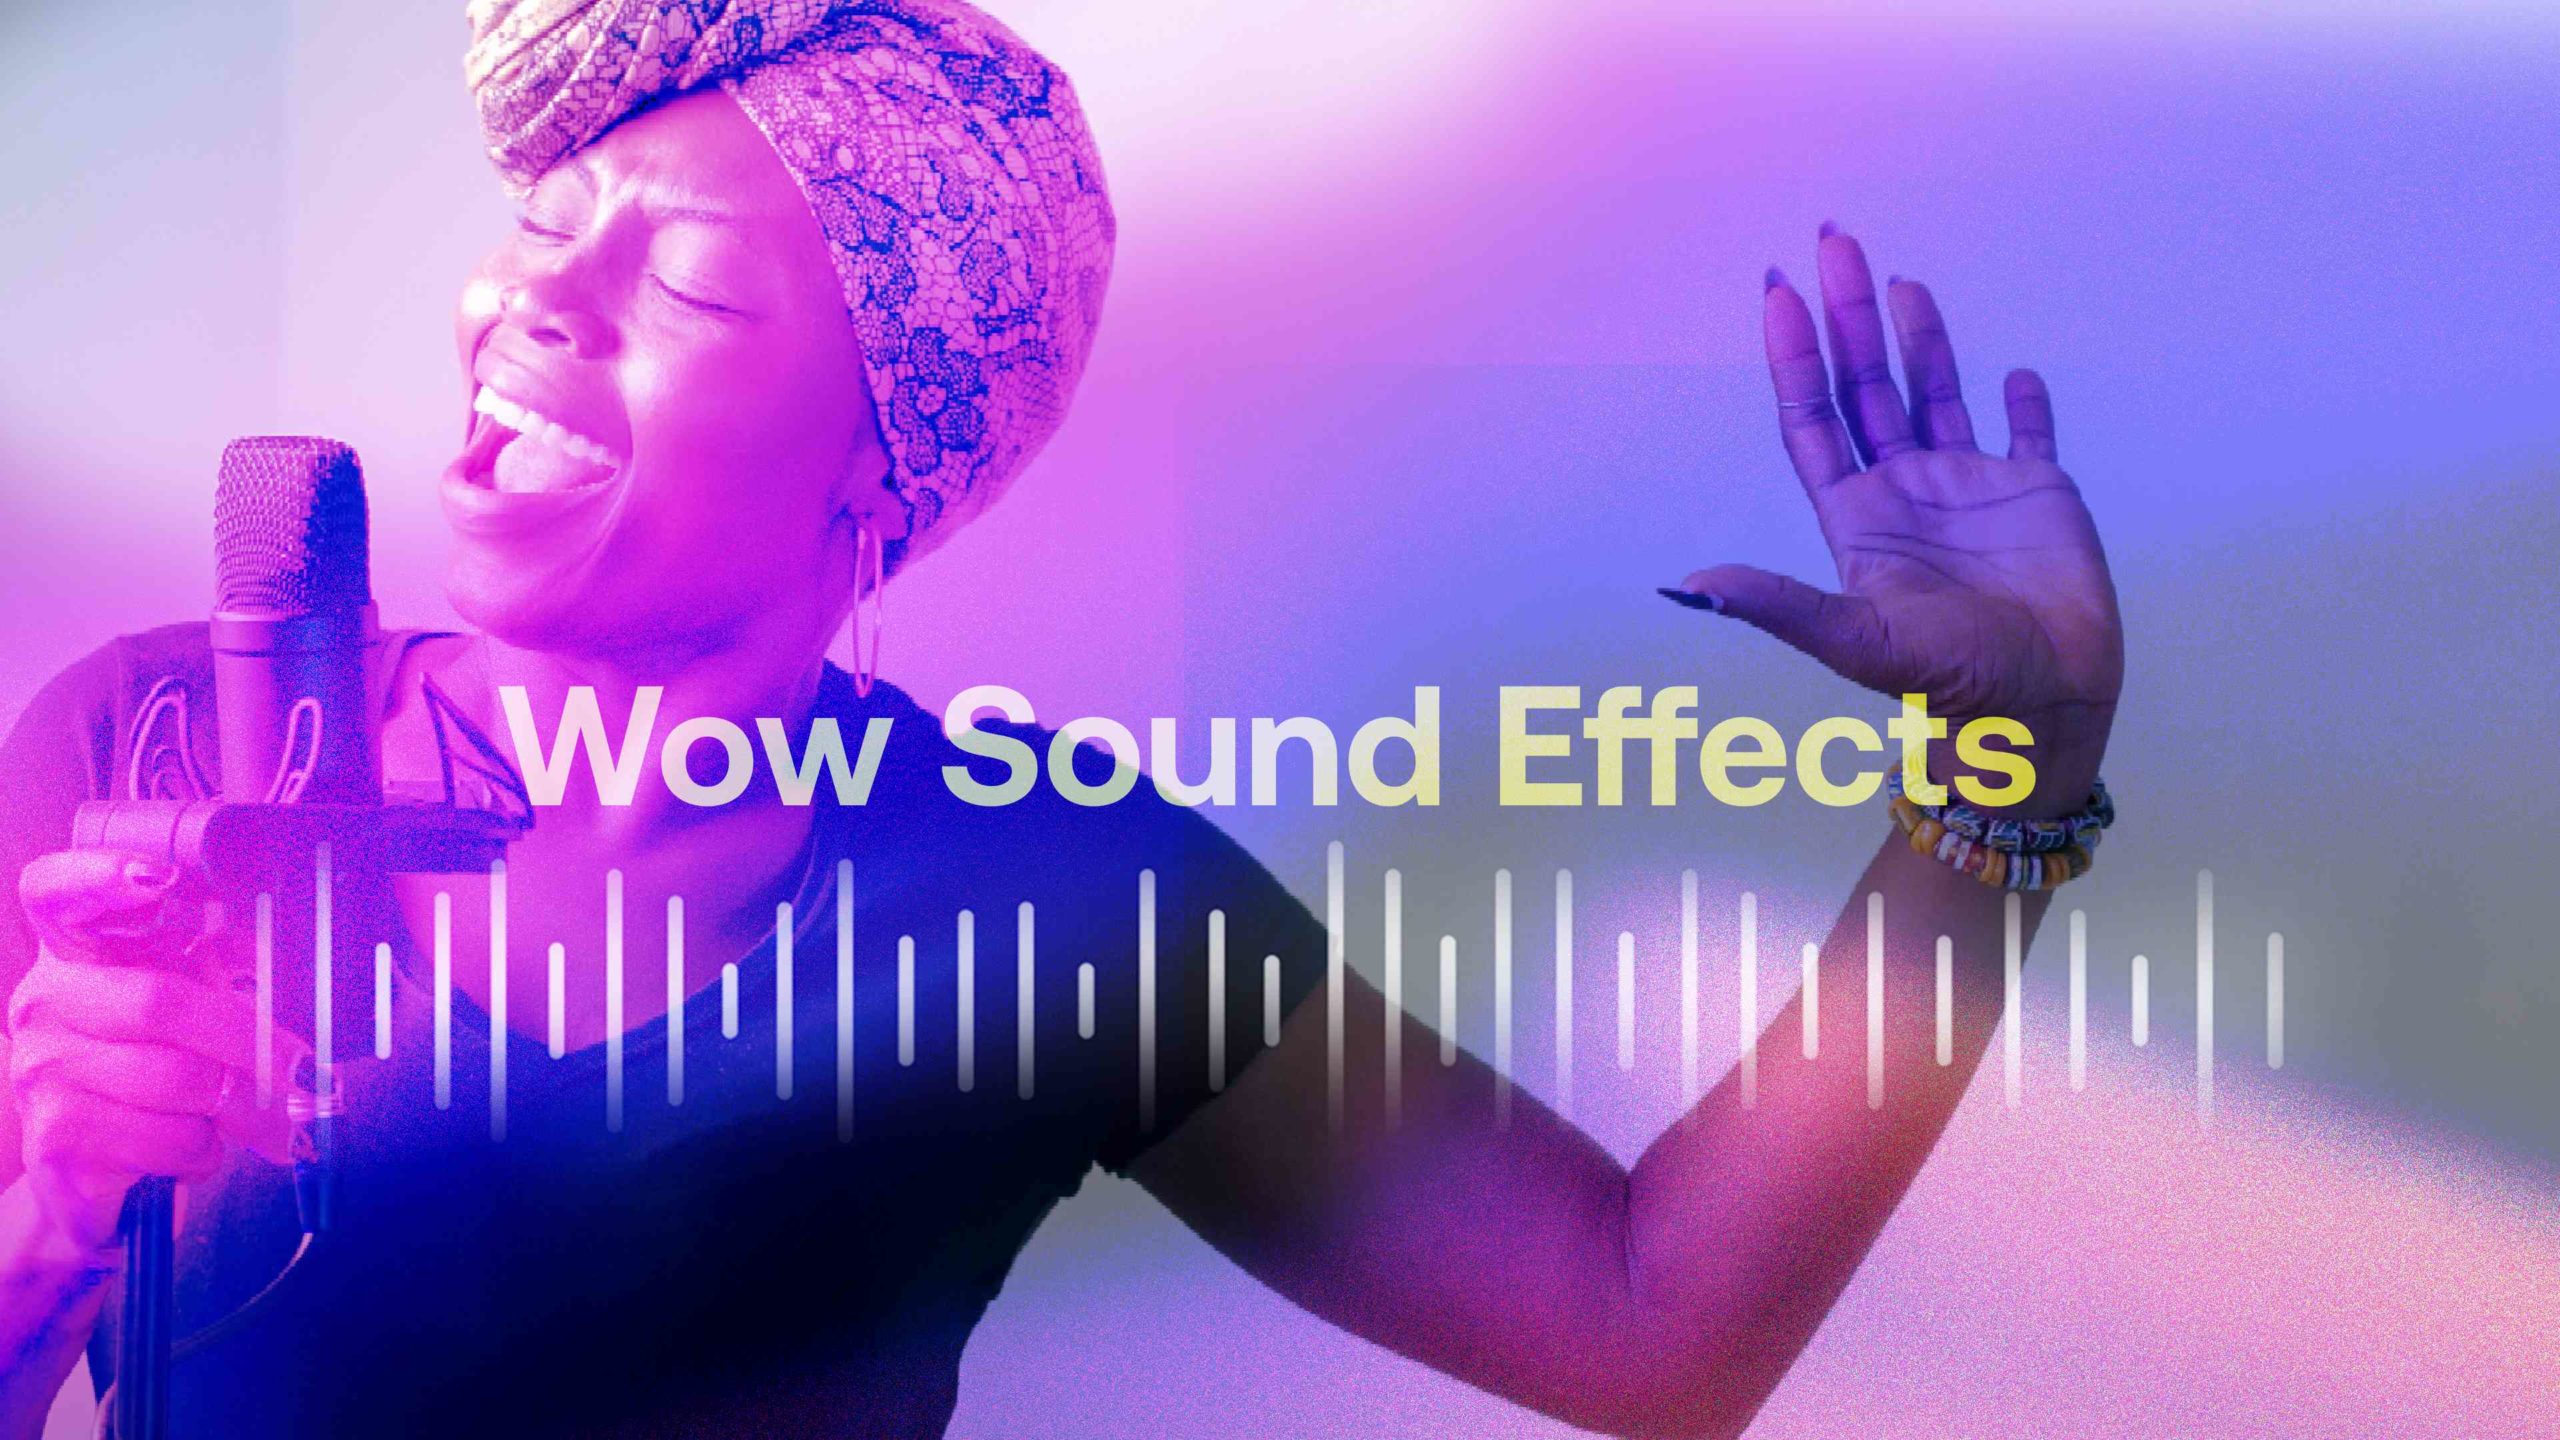 Top 5 Wow Sound Effects to Use for Your Social Videos - Motion Array